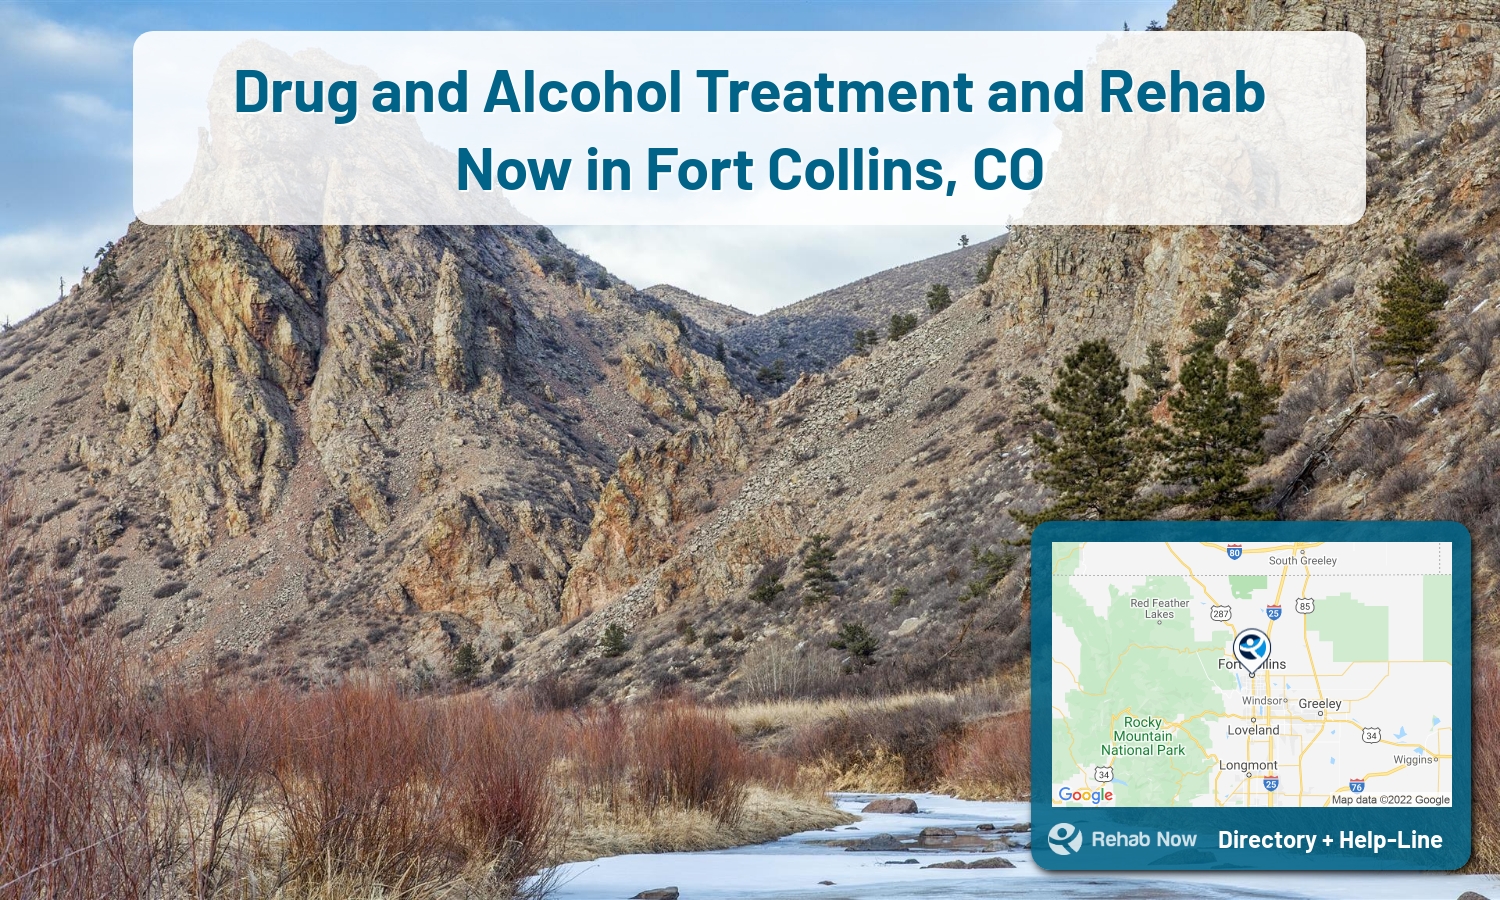 Fort Collins, CO Treatment Centers. Find drug rehab in Fort Collins, Colorado, or detox and treatment programs. Get the right help now!